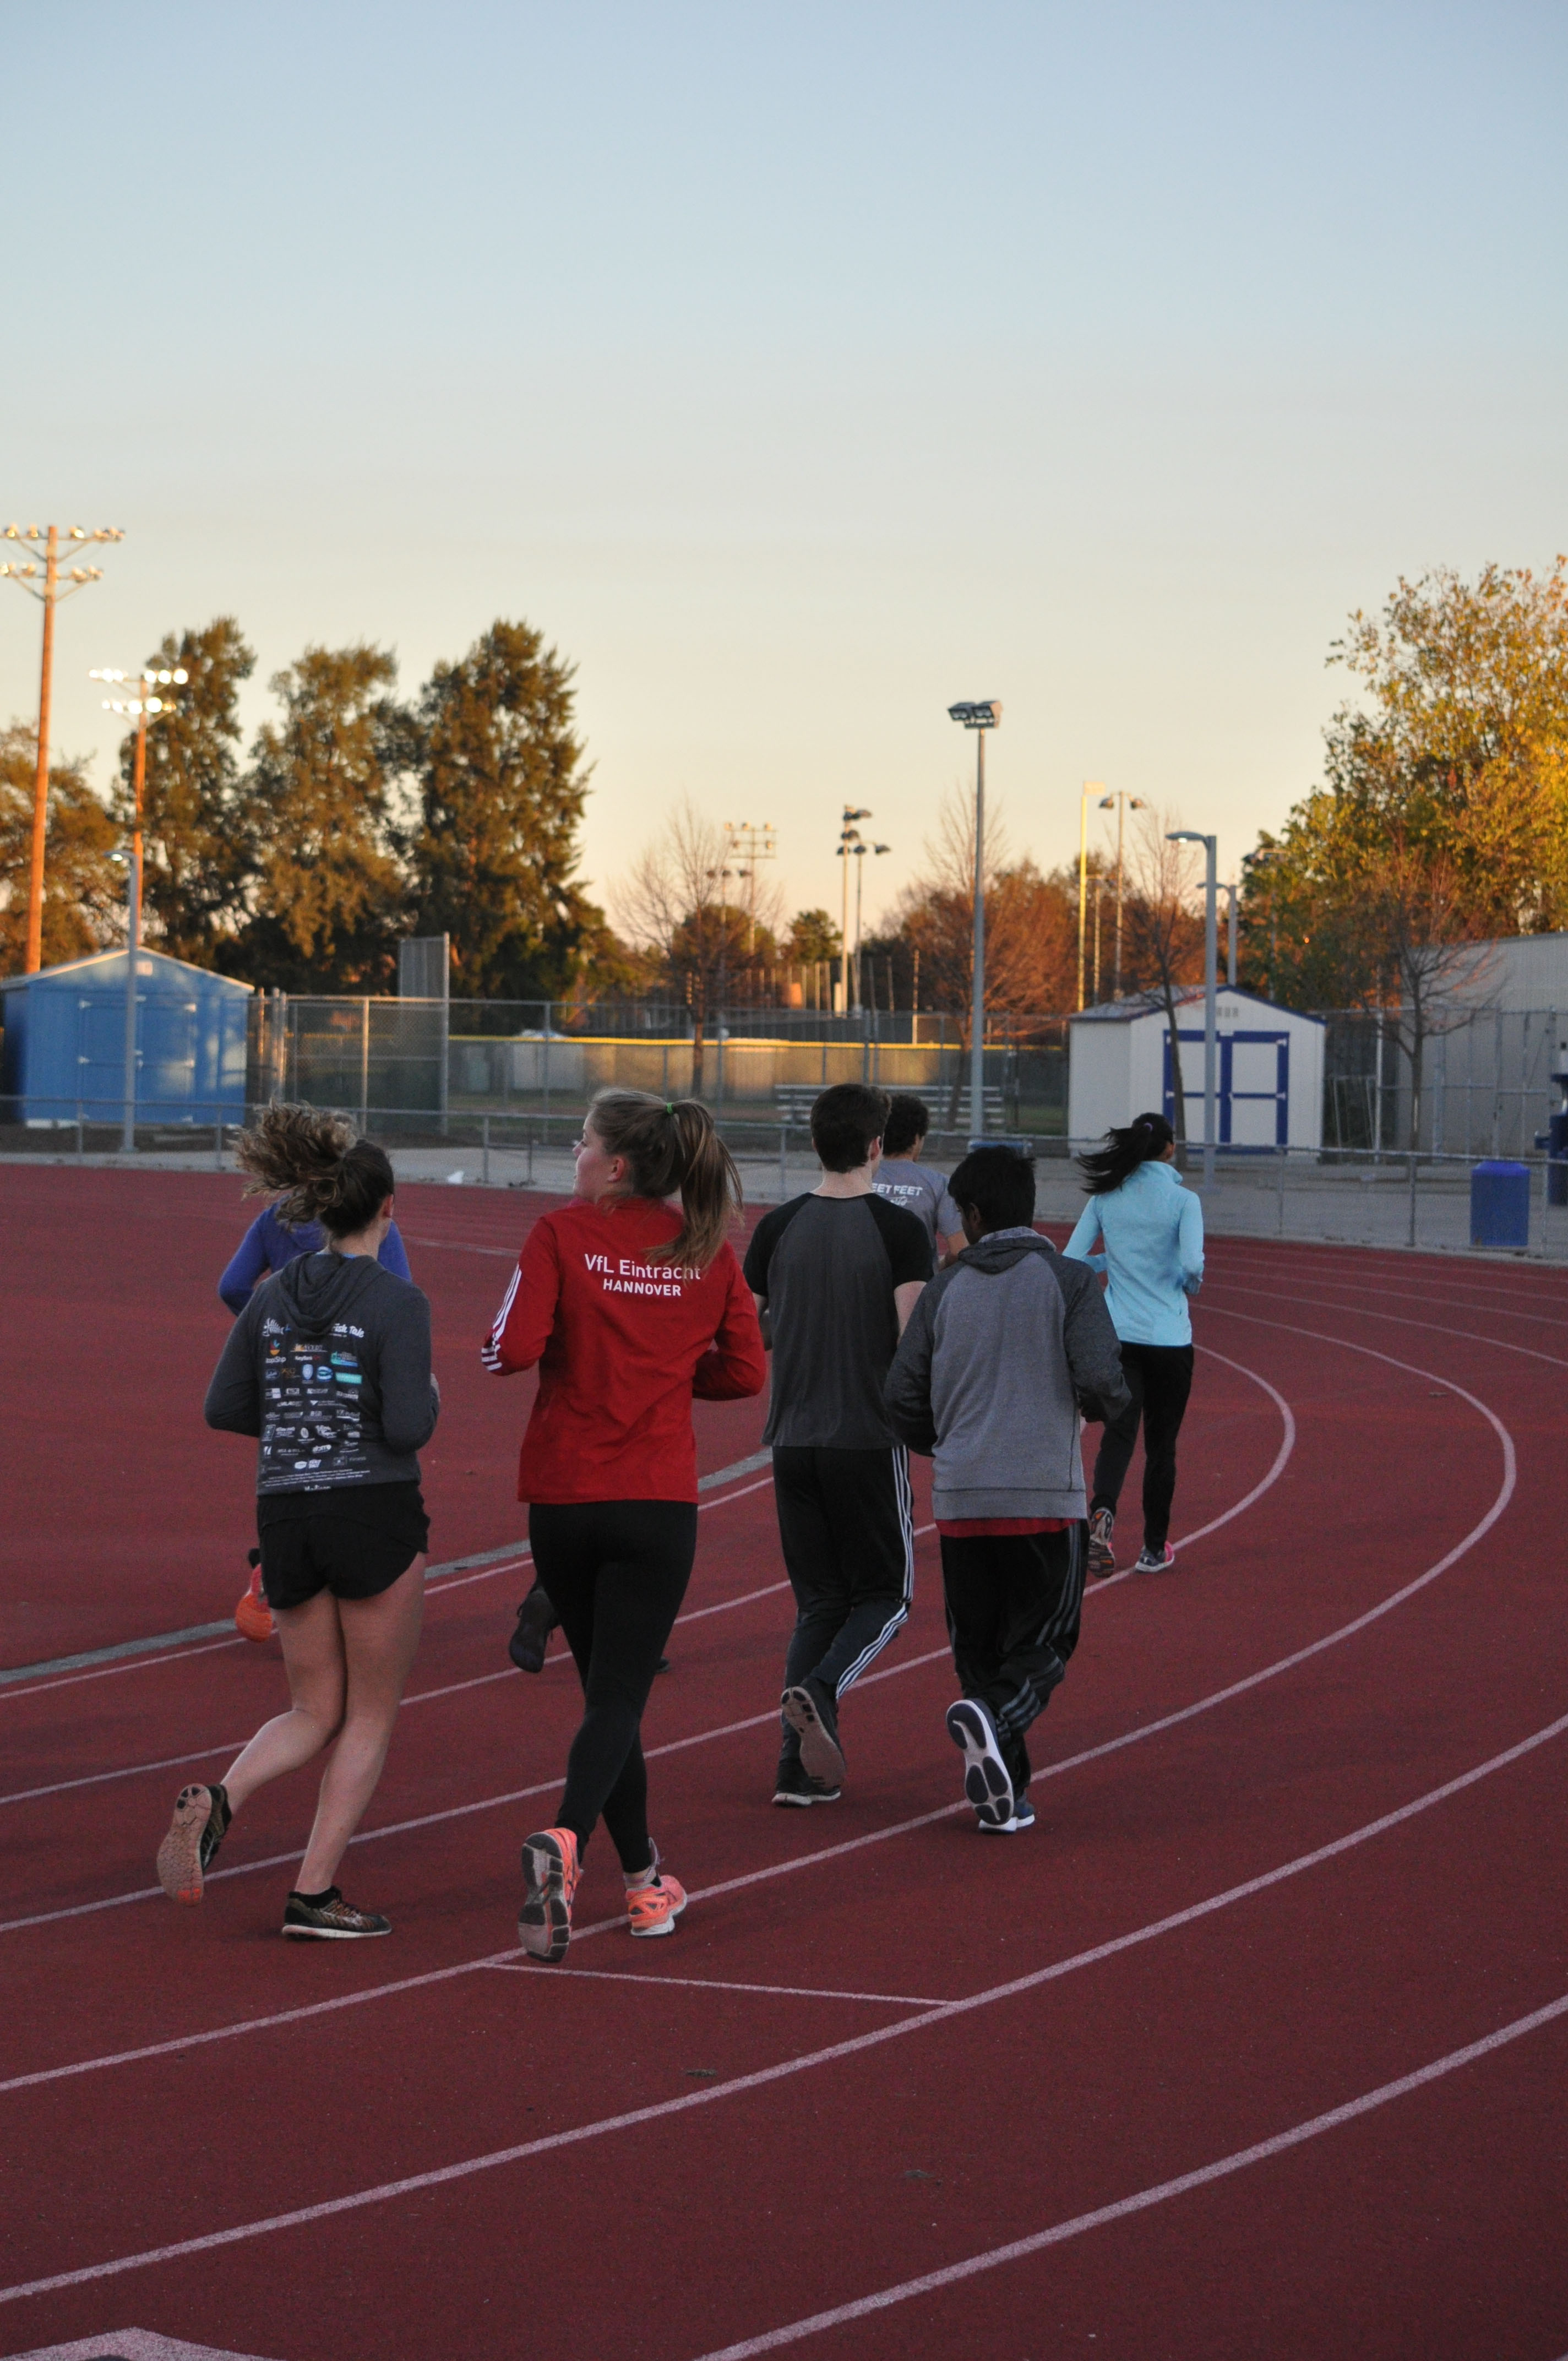 A group of runners begins a lap around the track.